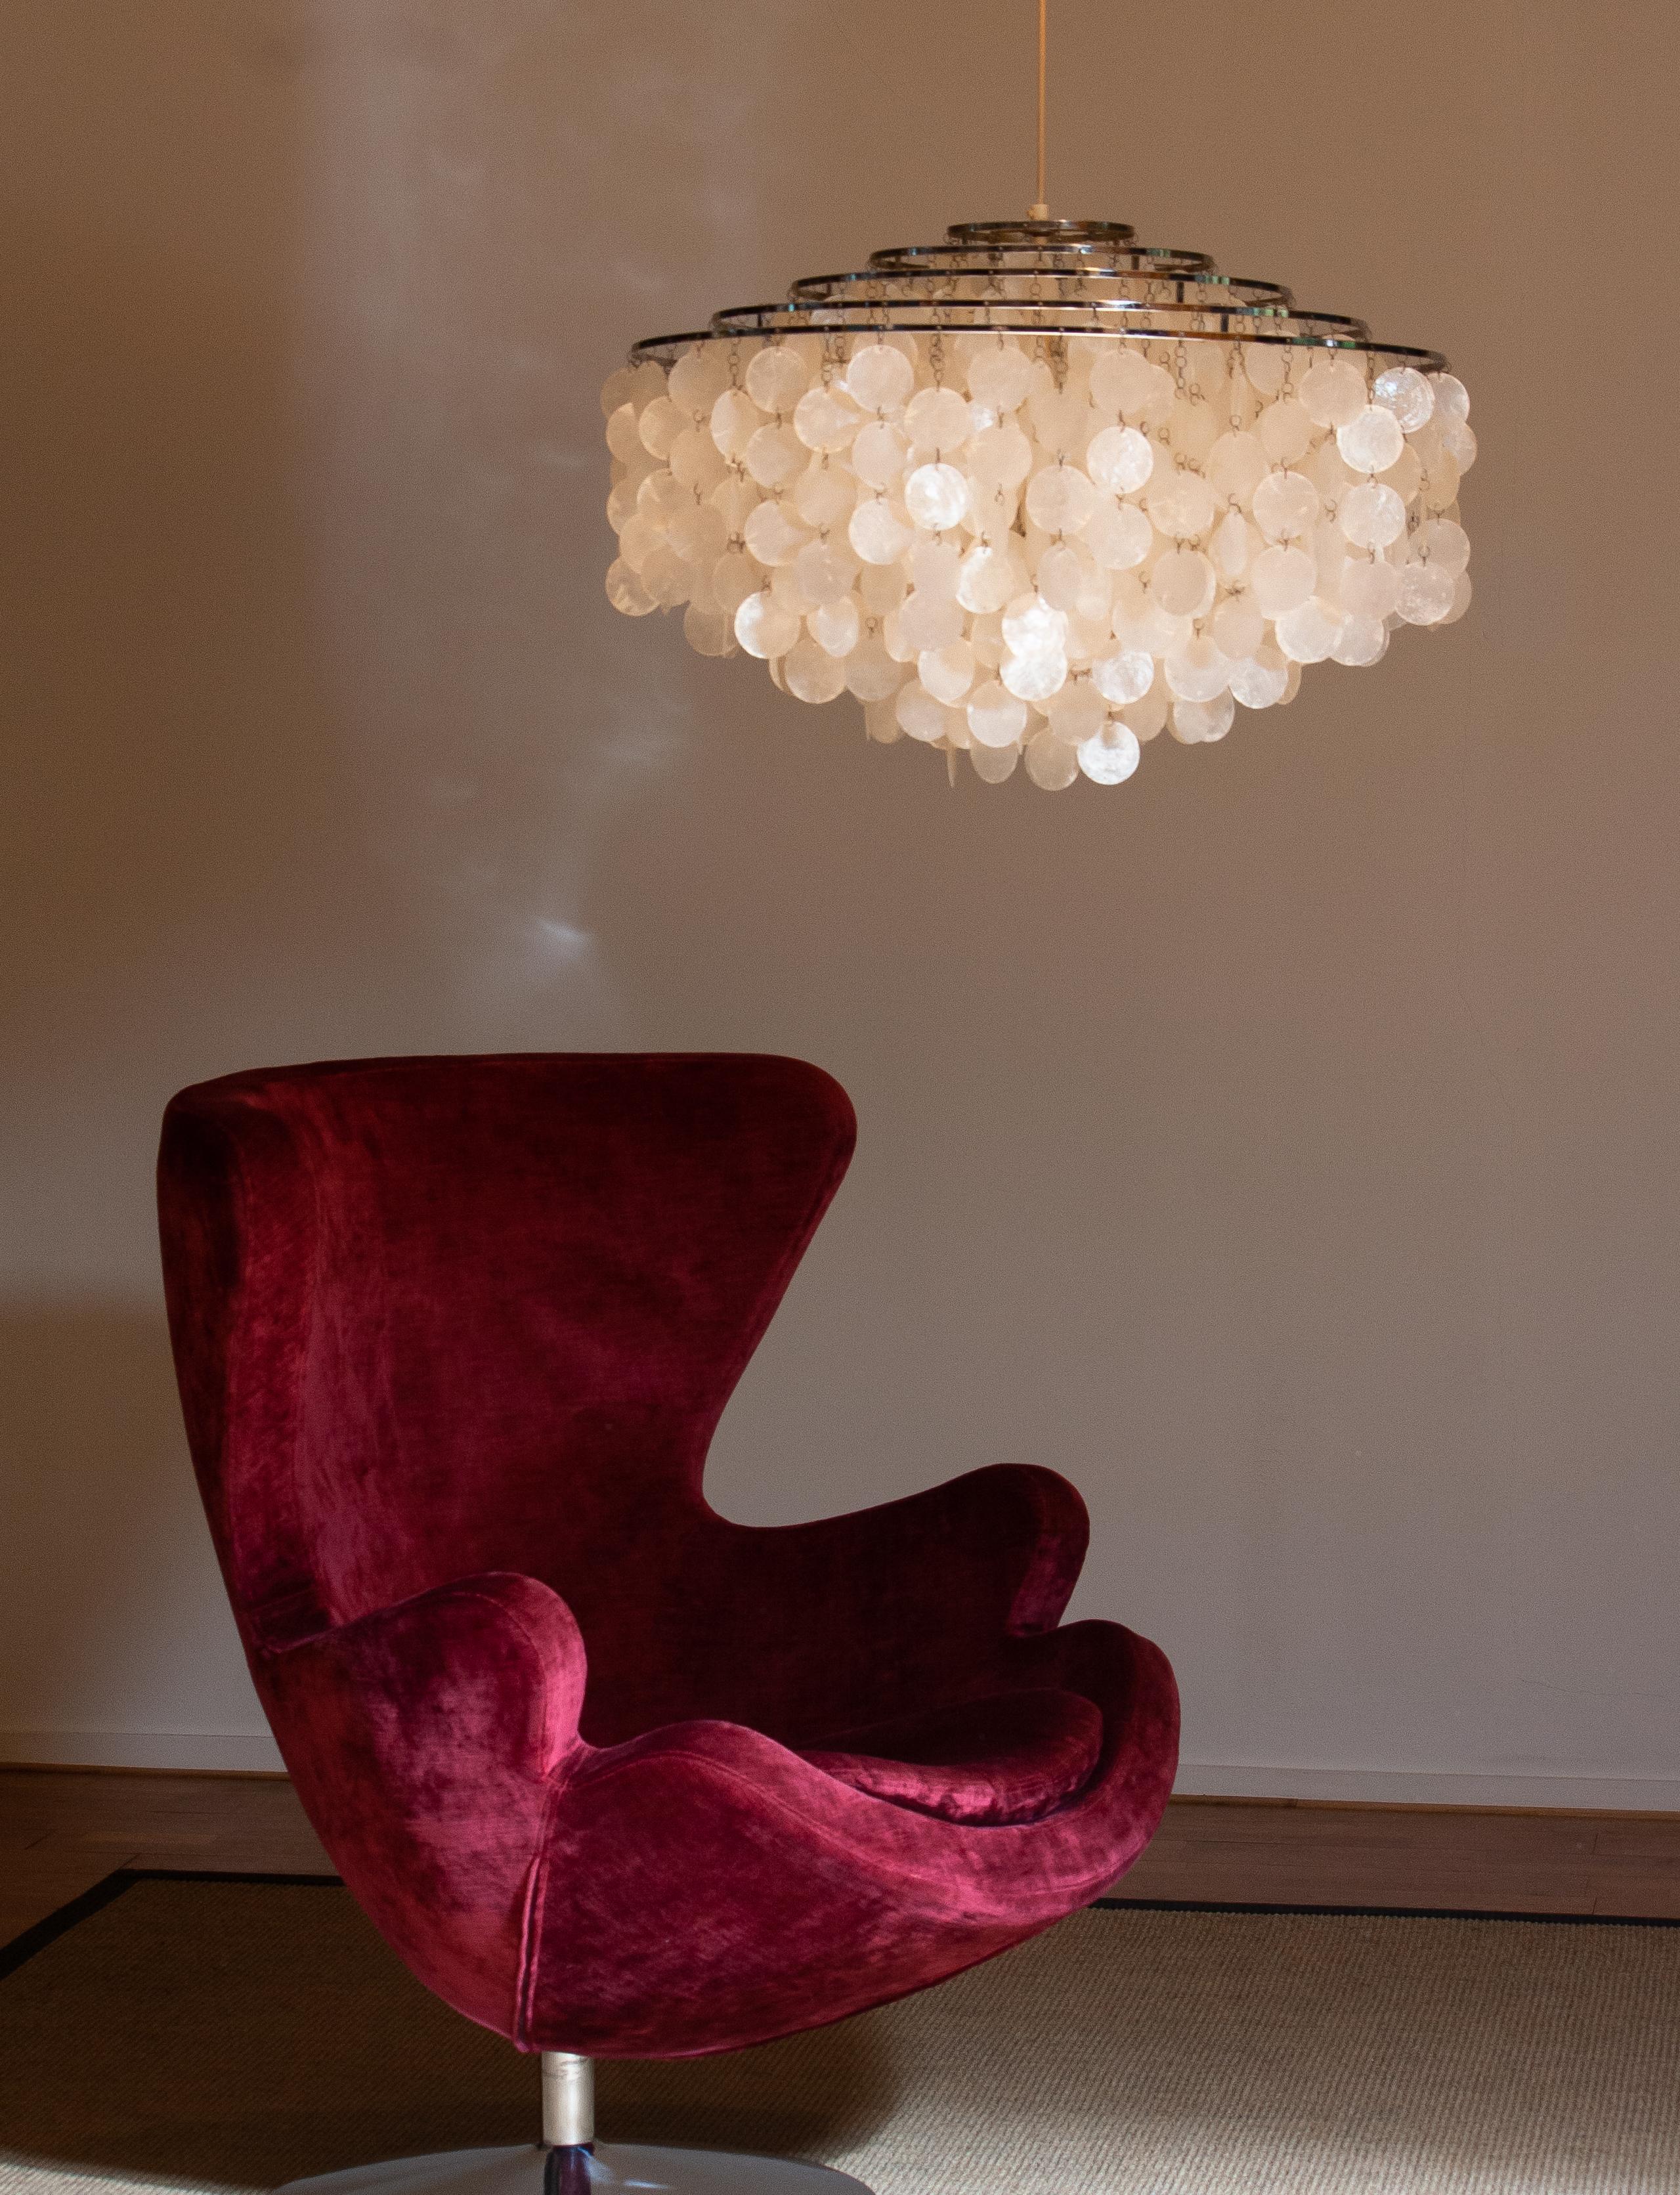 Pair of Extra Large Capiz Shell Chandeliers by Verner Panton for Luber AG. Swiss 4